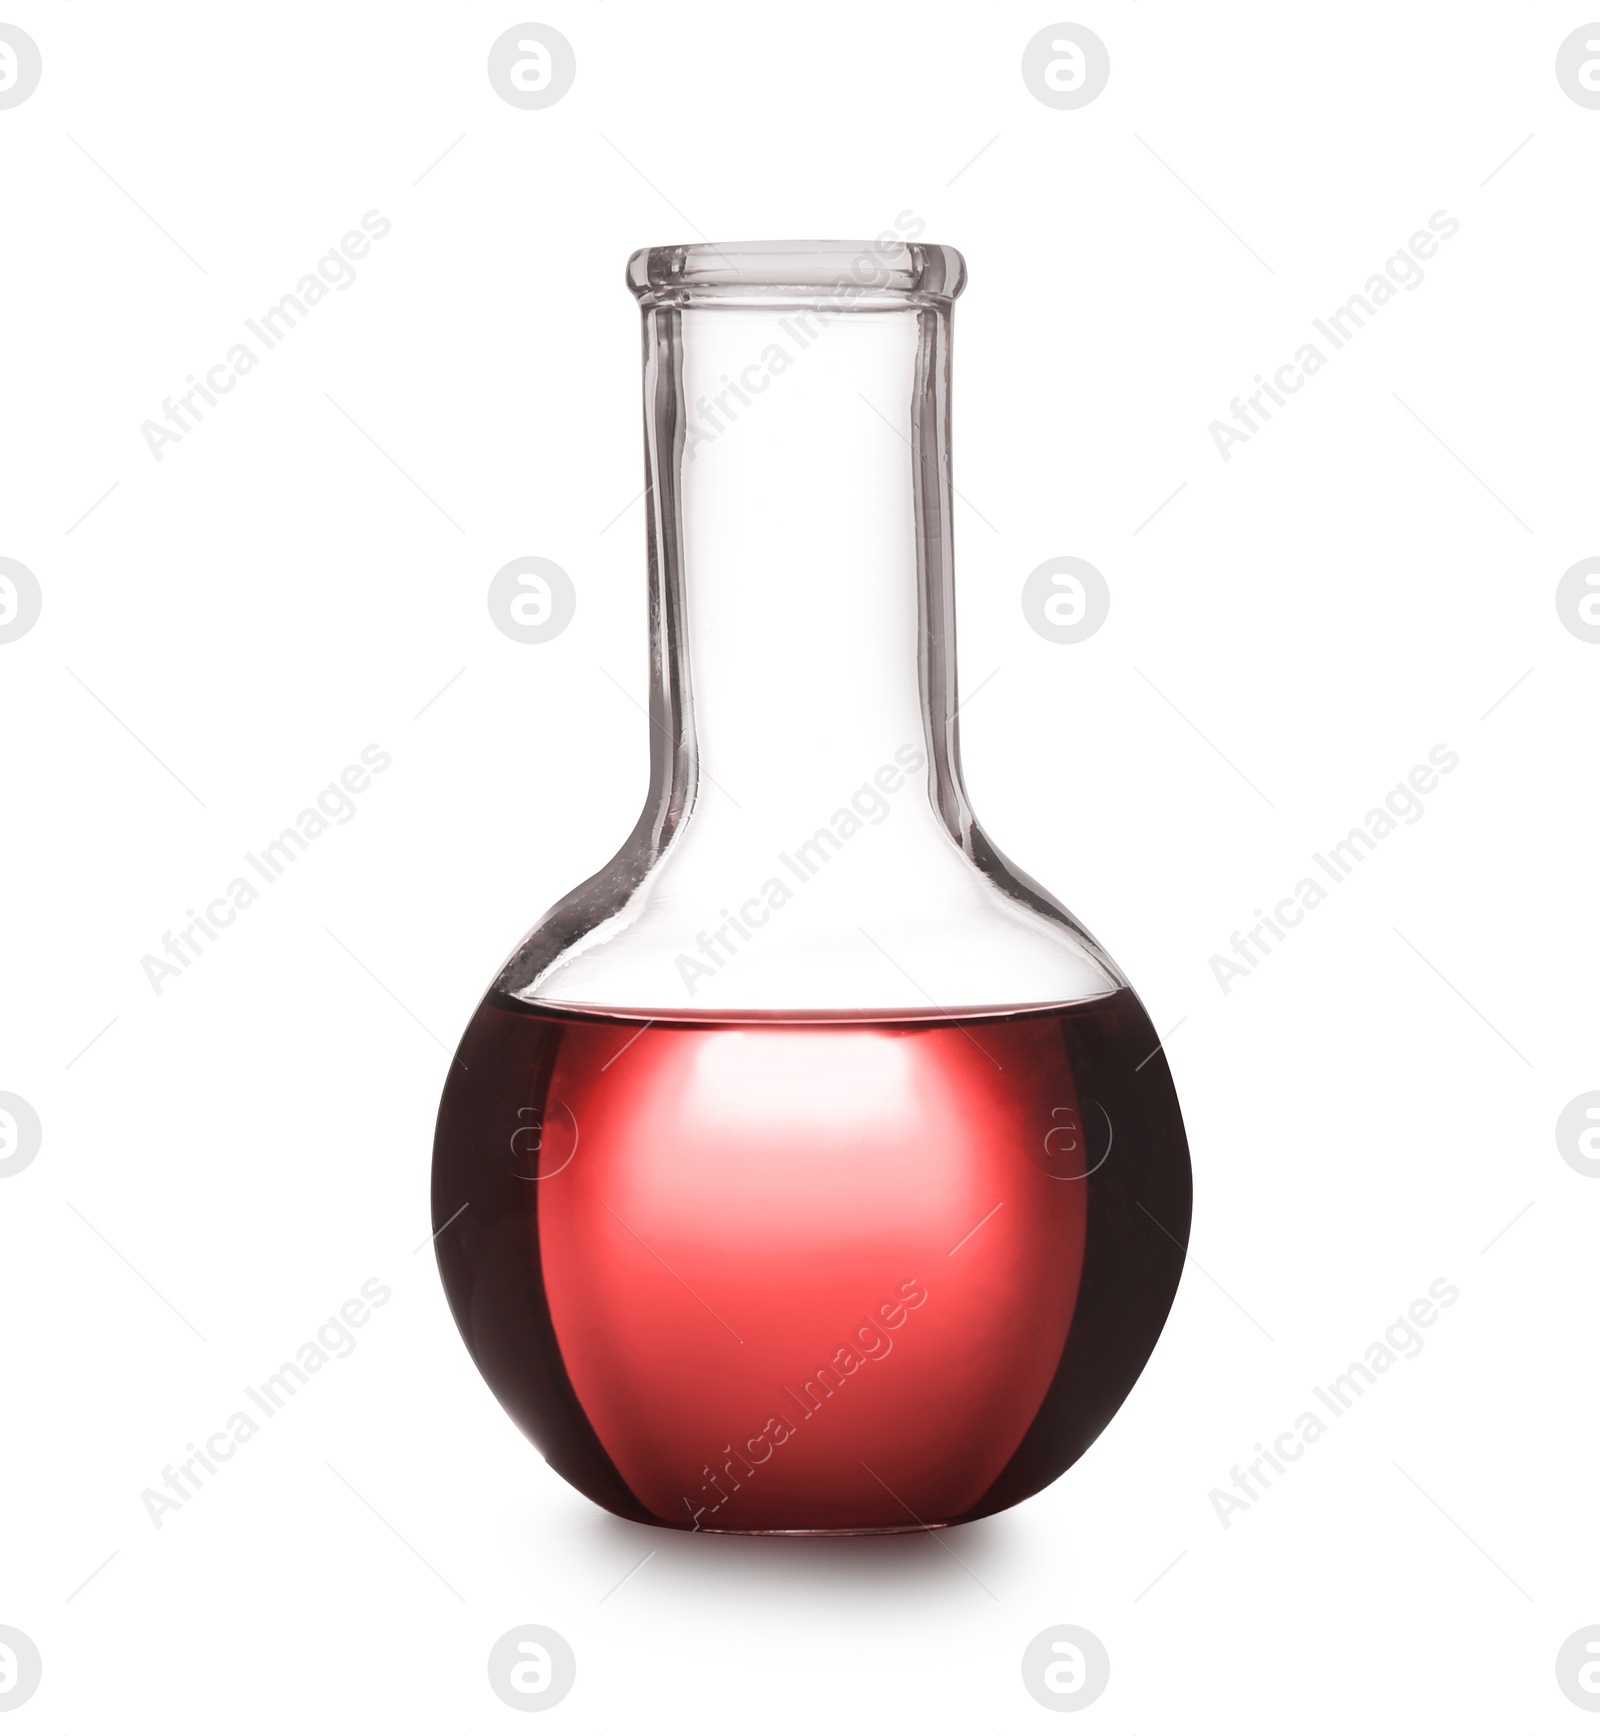 Image of Boiling flask with red liquid isolated on white. Laboratory glassware